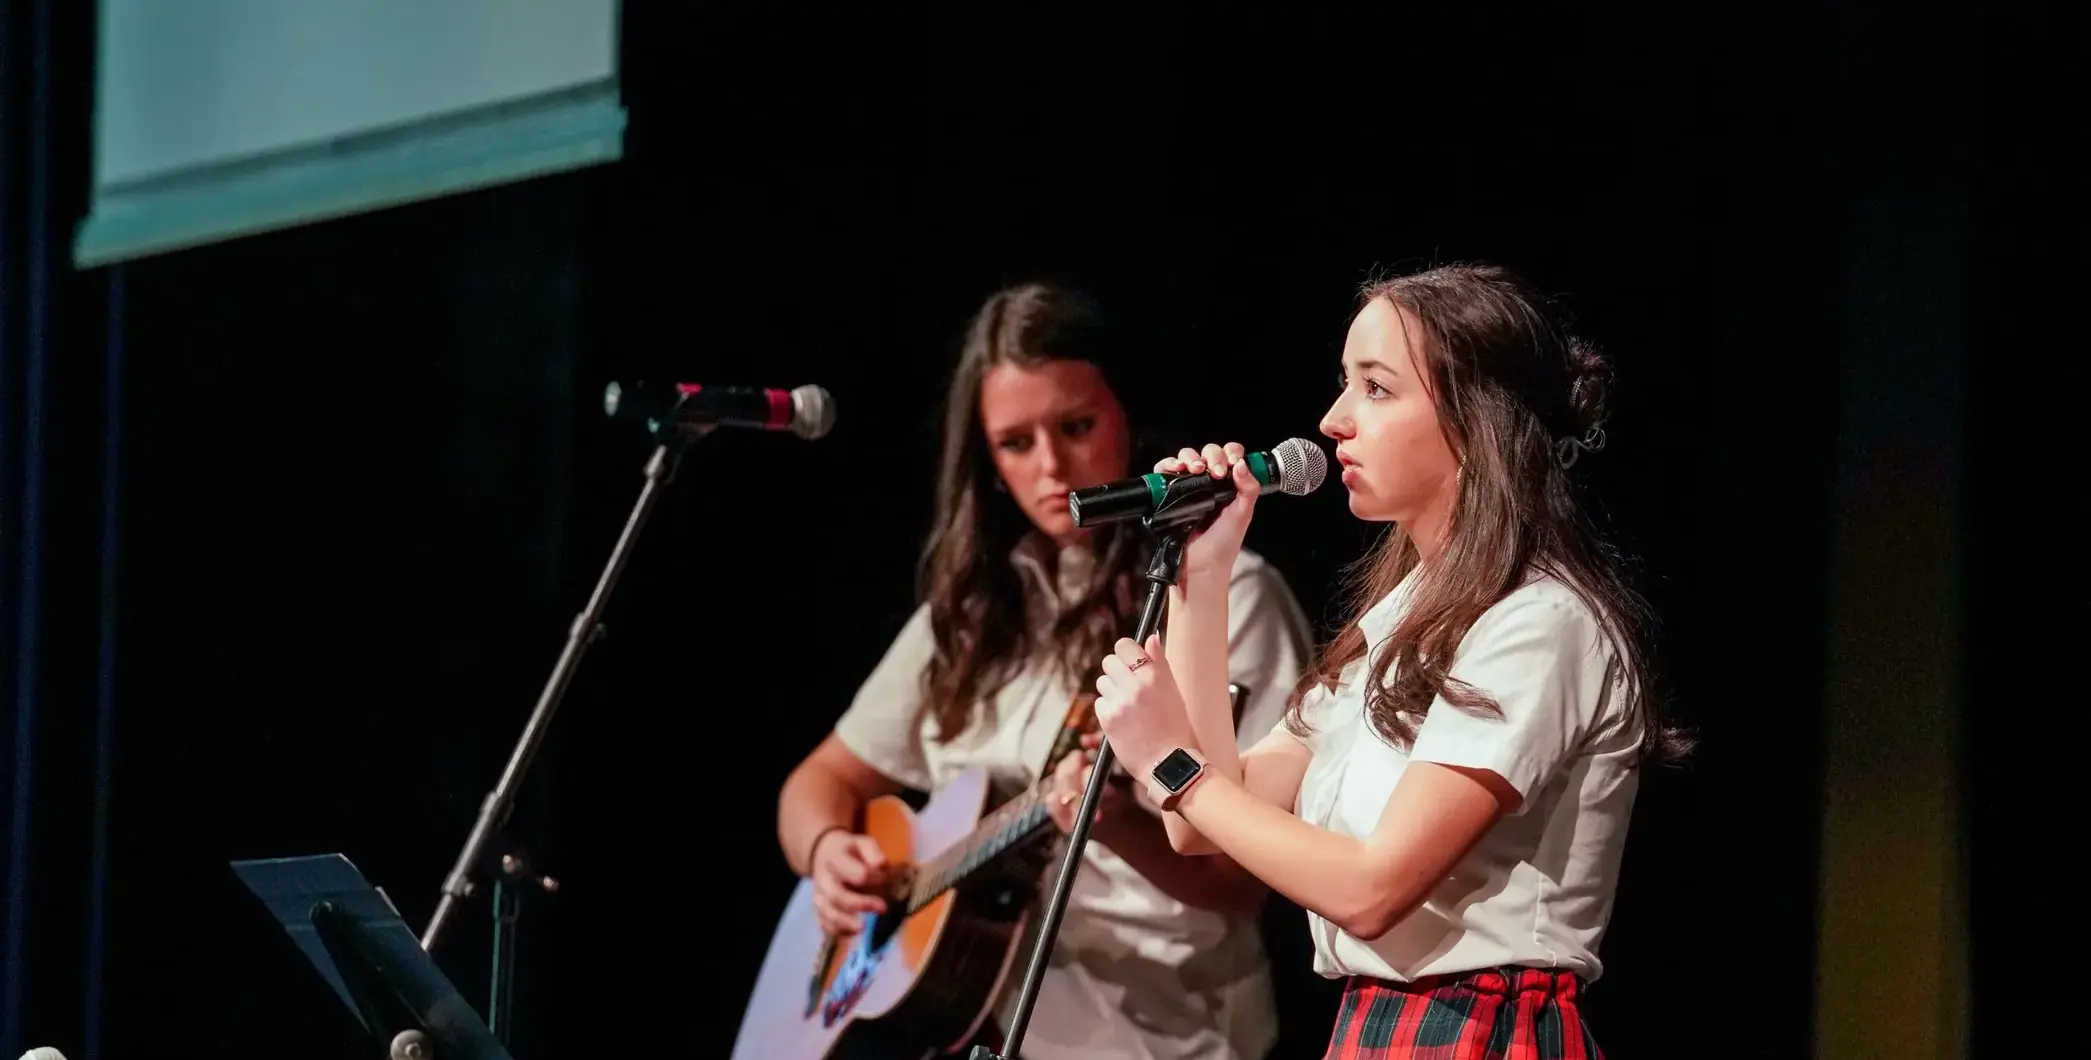 Two students performing onstage, one singing and the other playing guitar